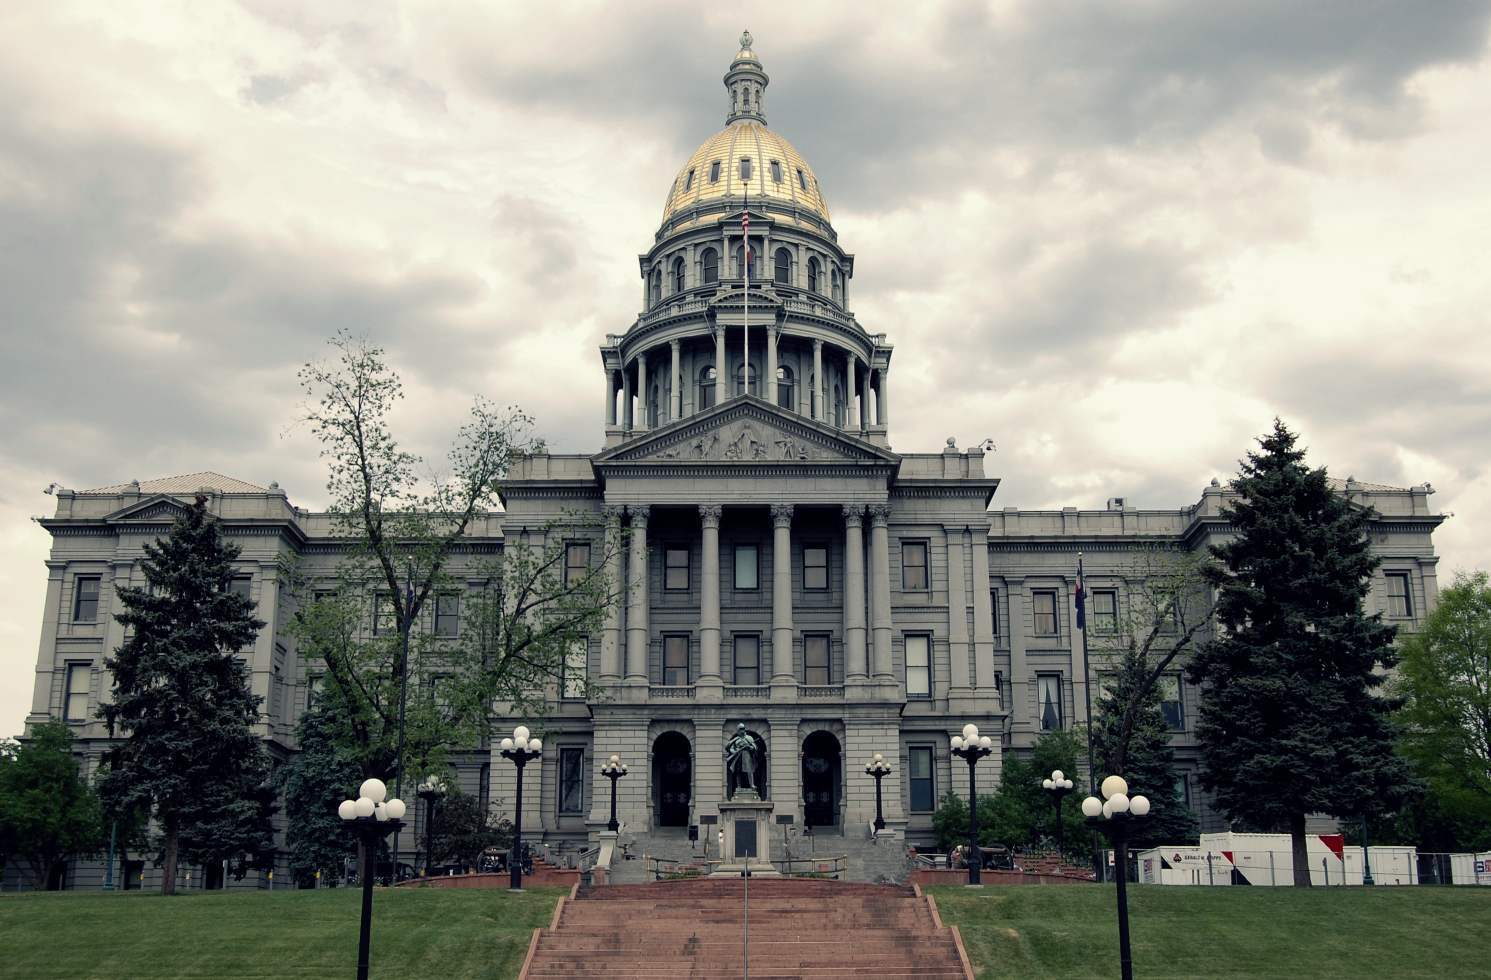 The Colorado State Capitol